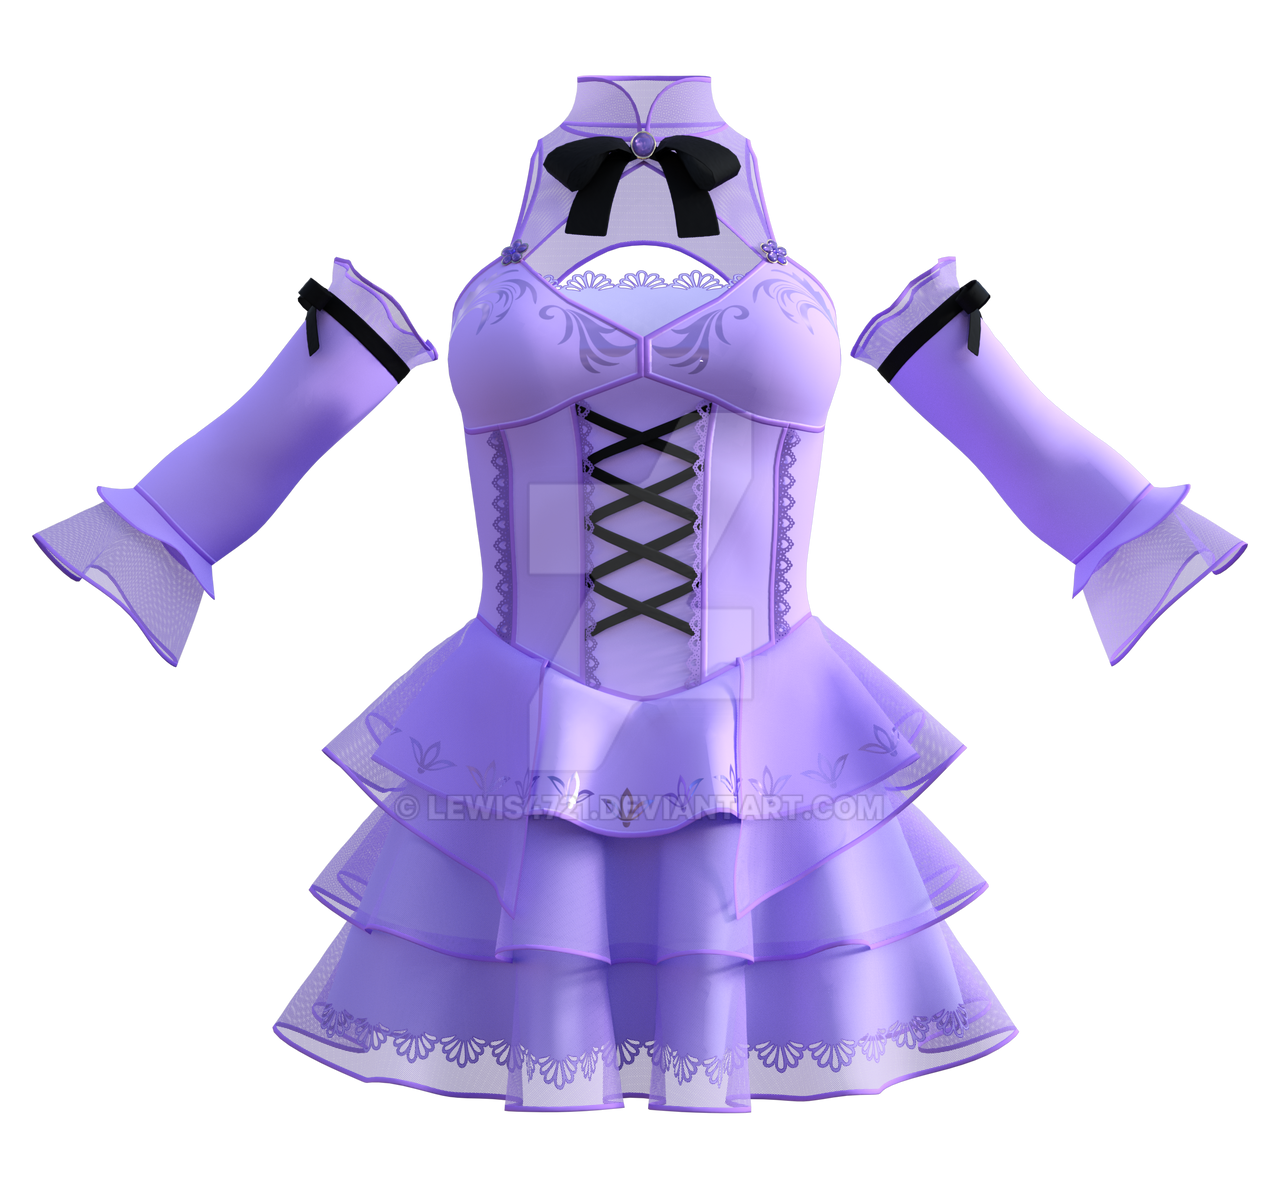 Purple Fantasy Dress, png overlay. by lewis4721 on DeviantArt